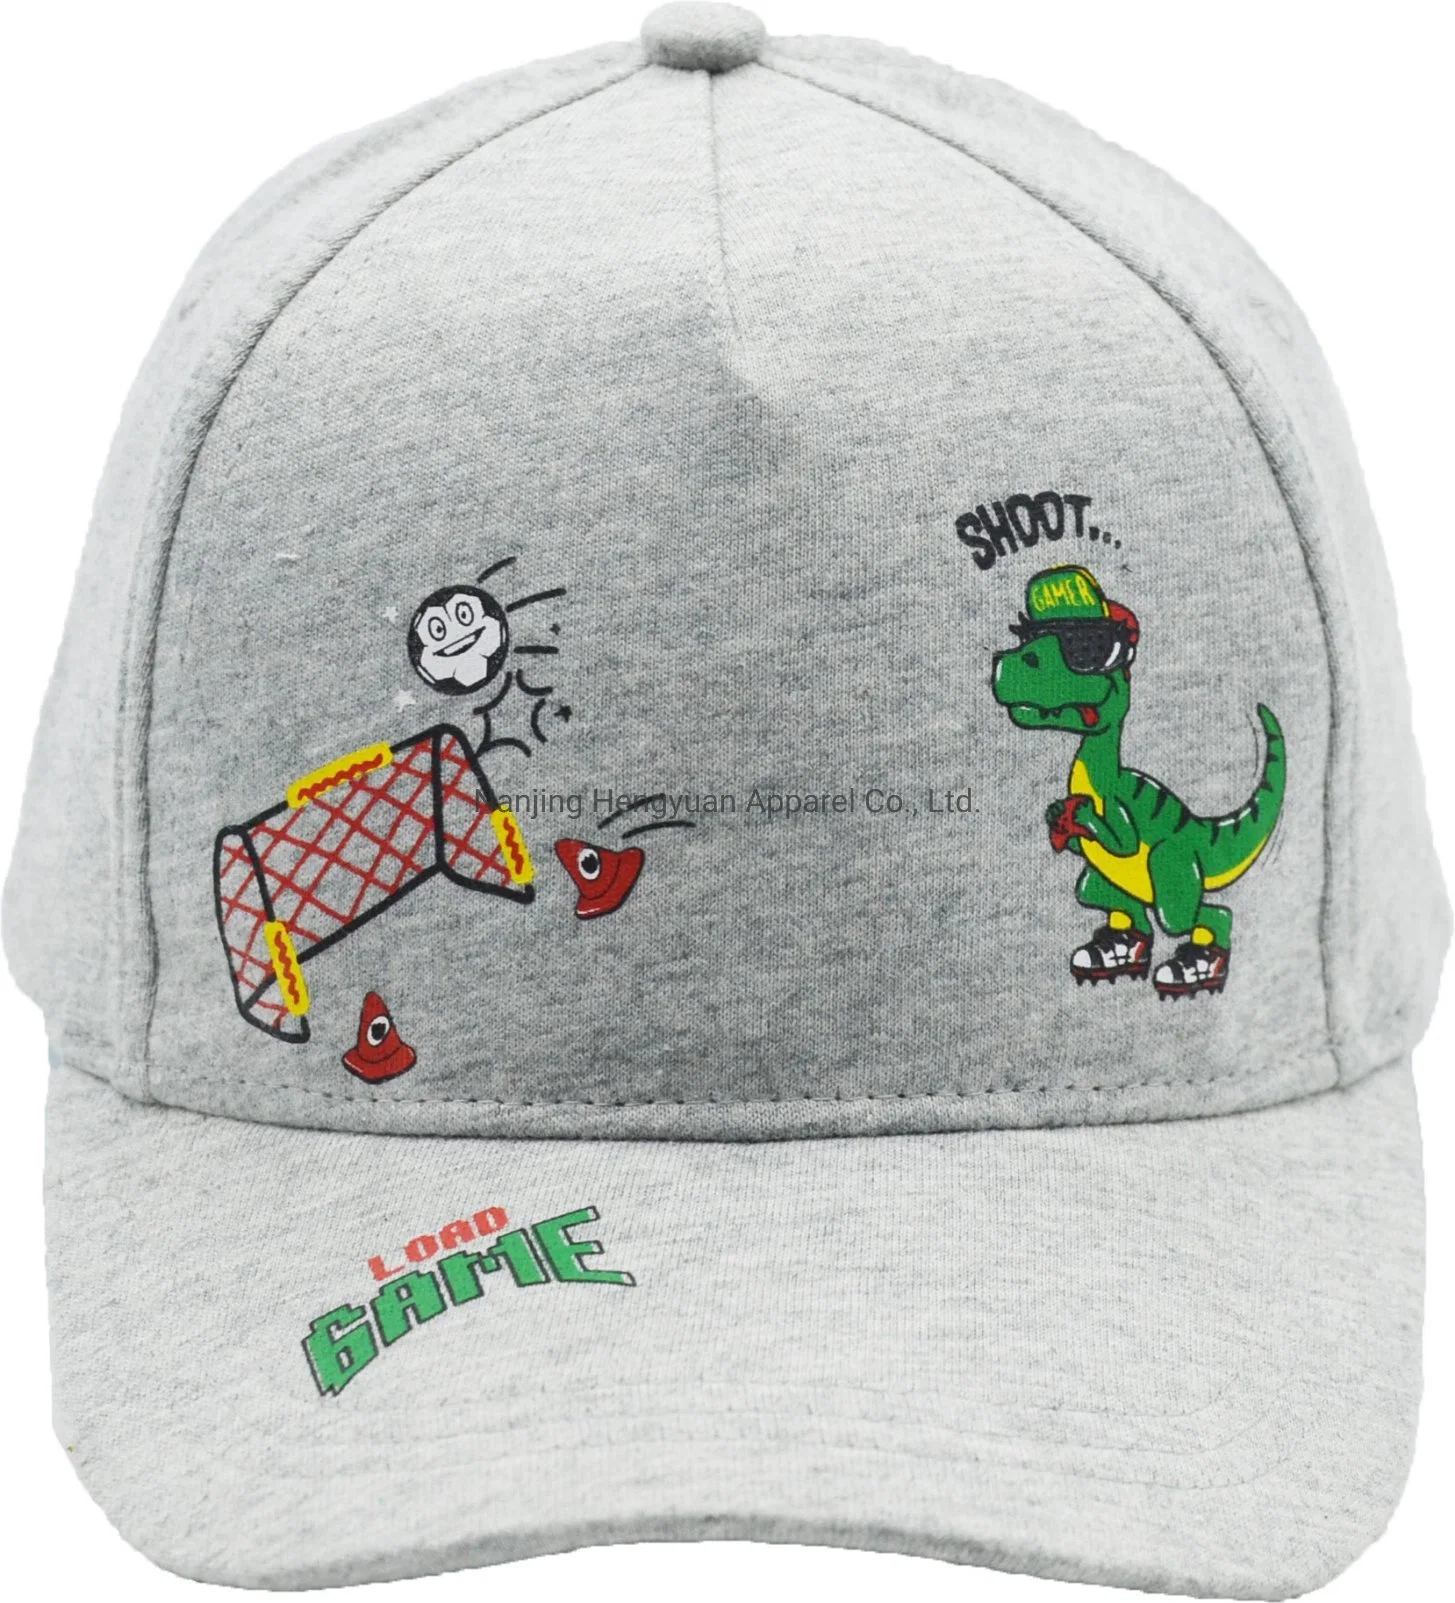 Wholesale/Supplier Boys Baseball Cap in 100% Cotton Jersey Fabric and Cartoon Print